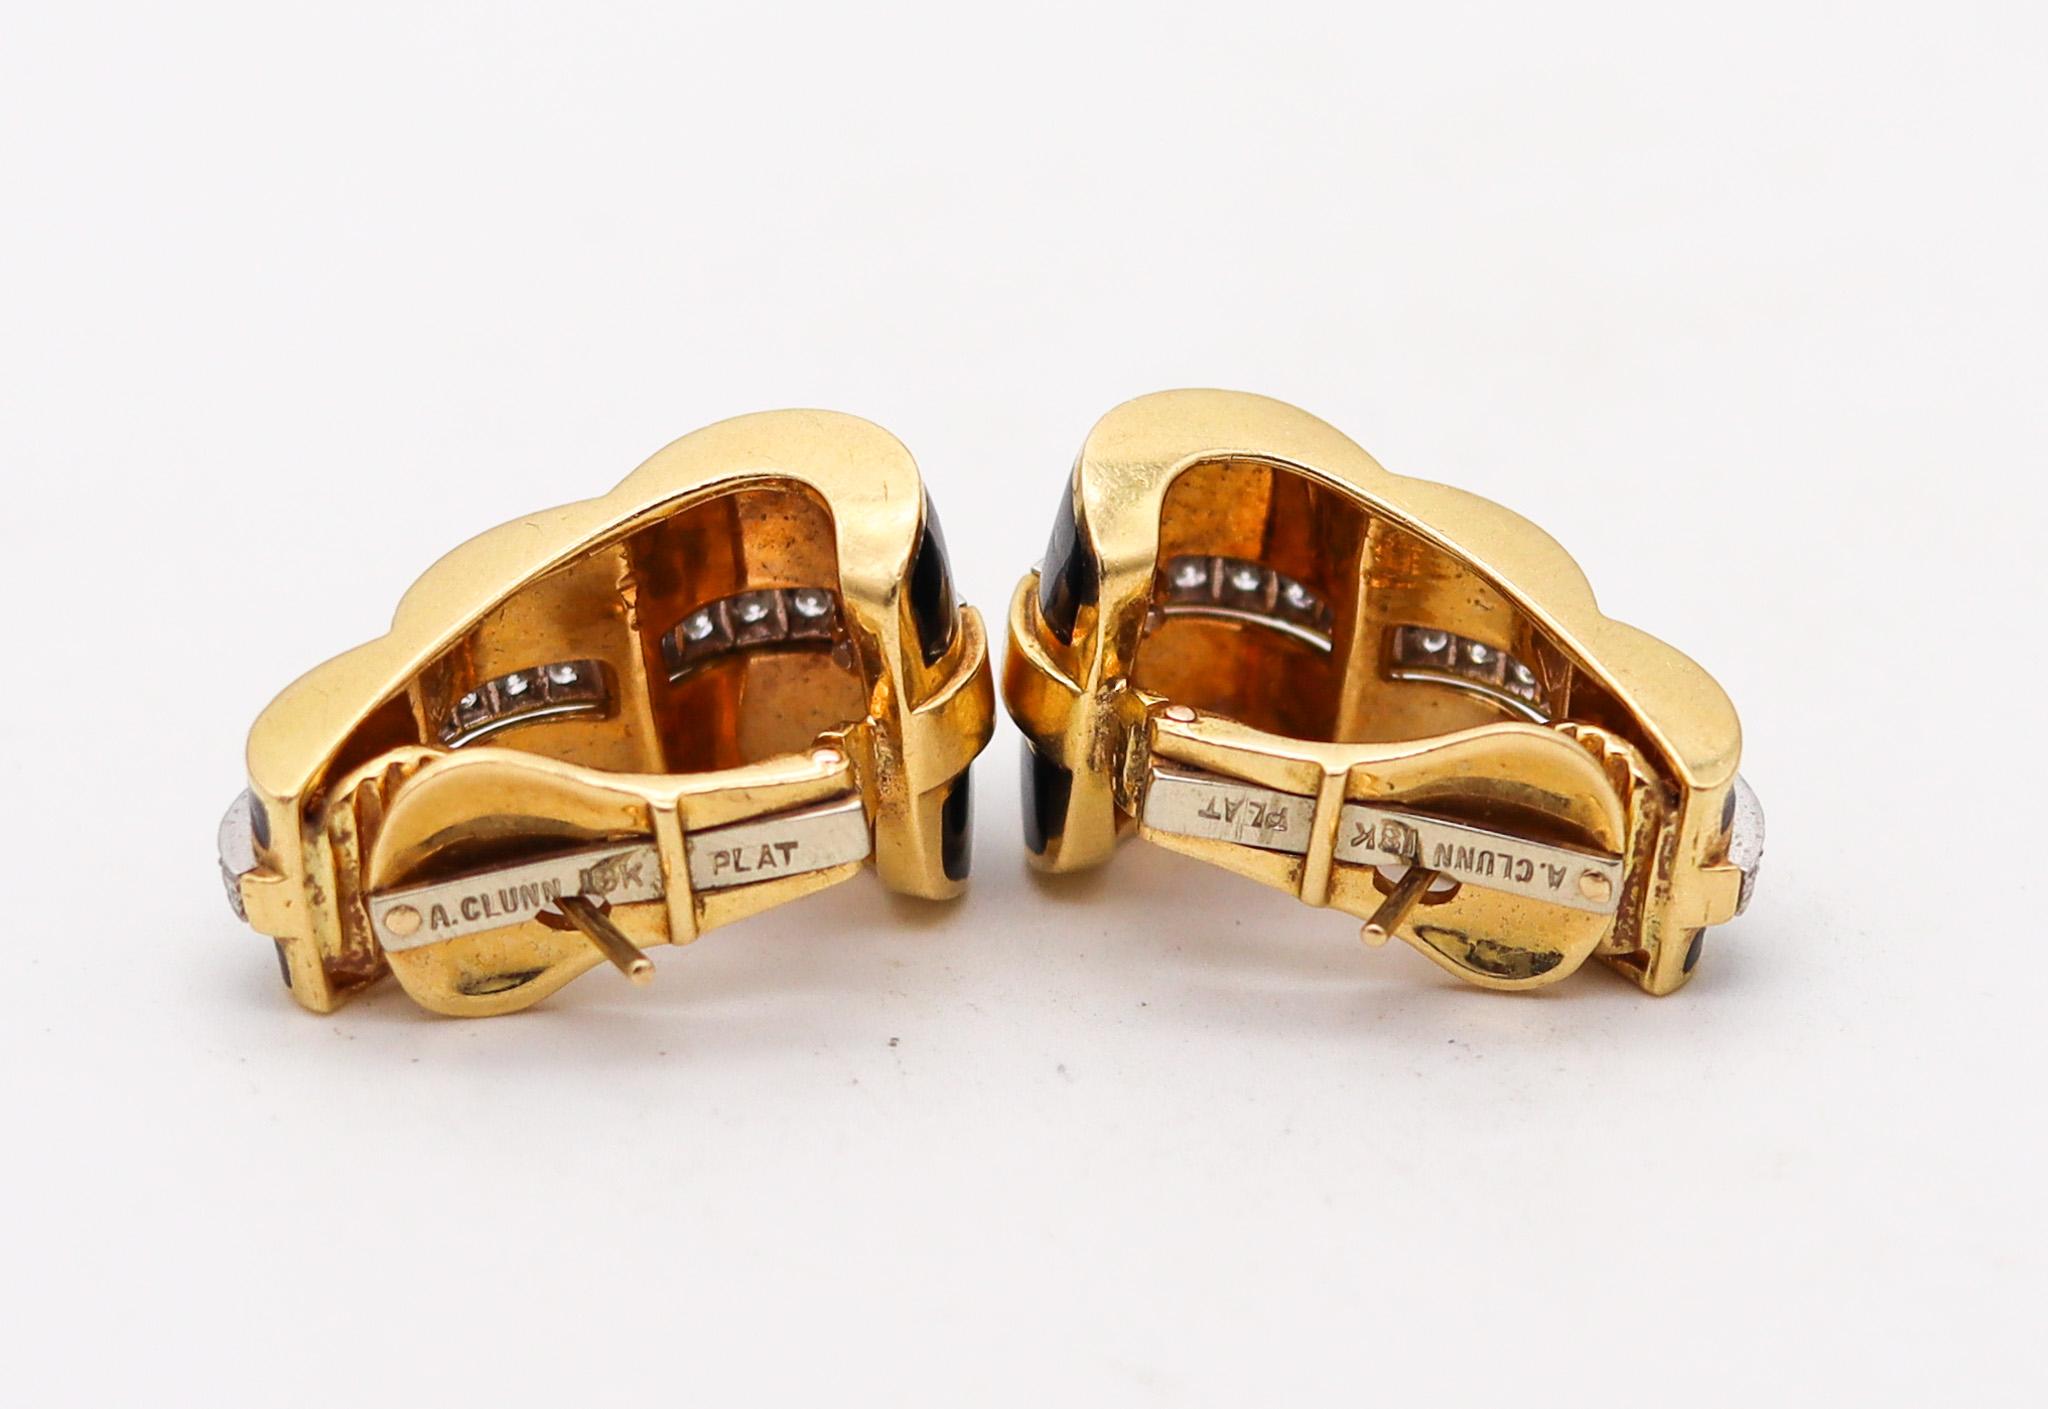 Modernist Andrew Clunn Enameled Earrings In 18Kt Gold And Platinum With 1.28 Ctw Diamonds For Sale